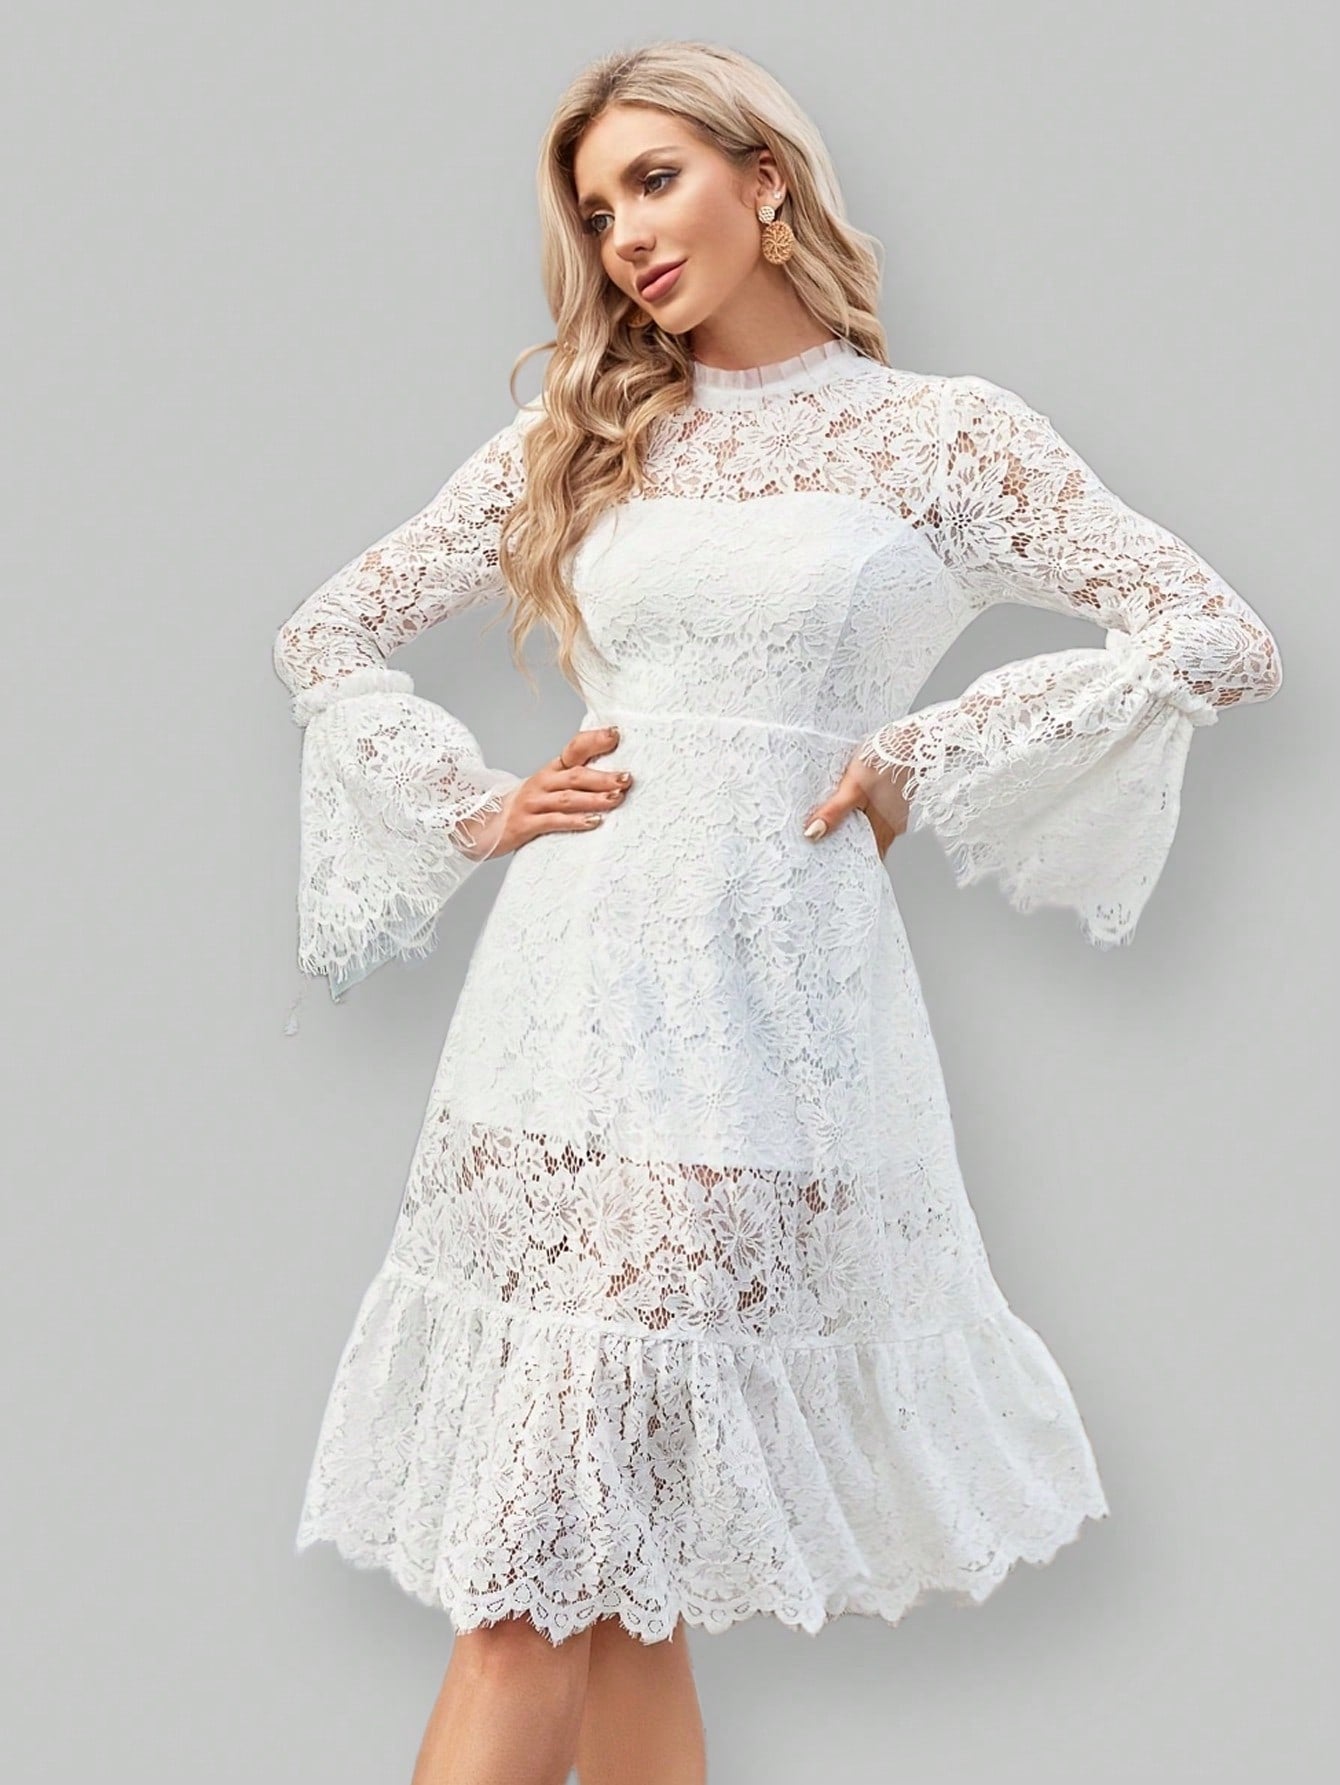 Formal Party Dress With Lace & Mesh Patchwork And Flared Sleeves